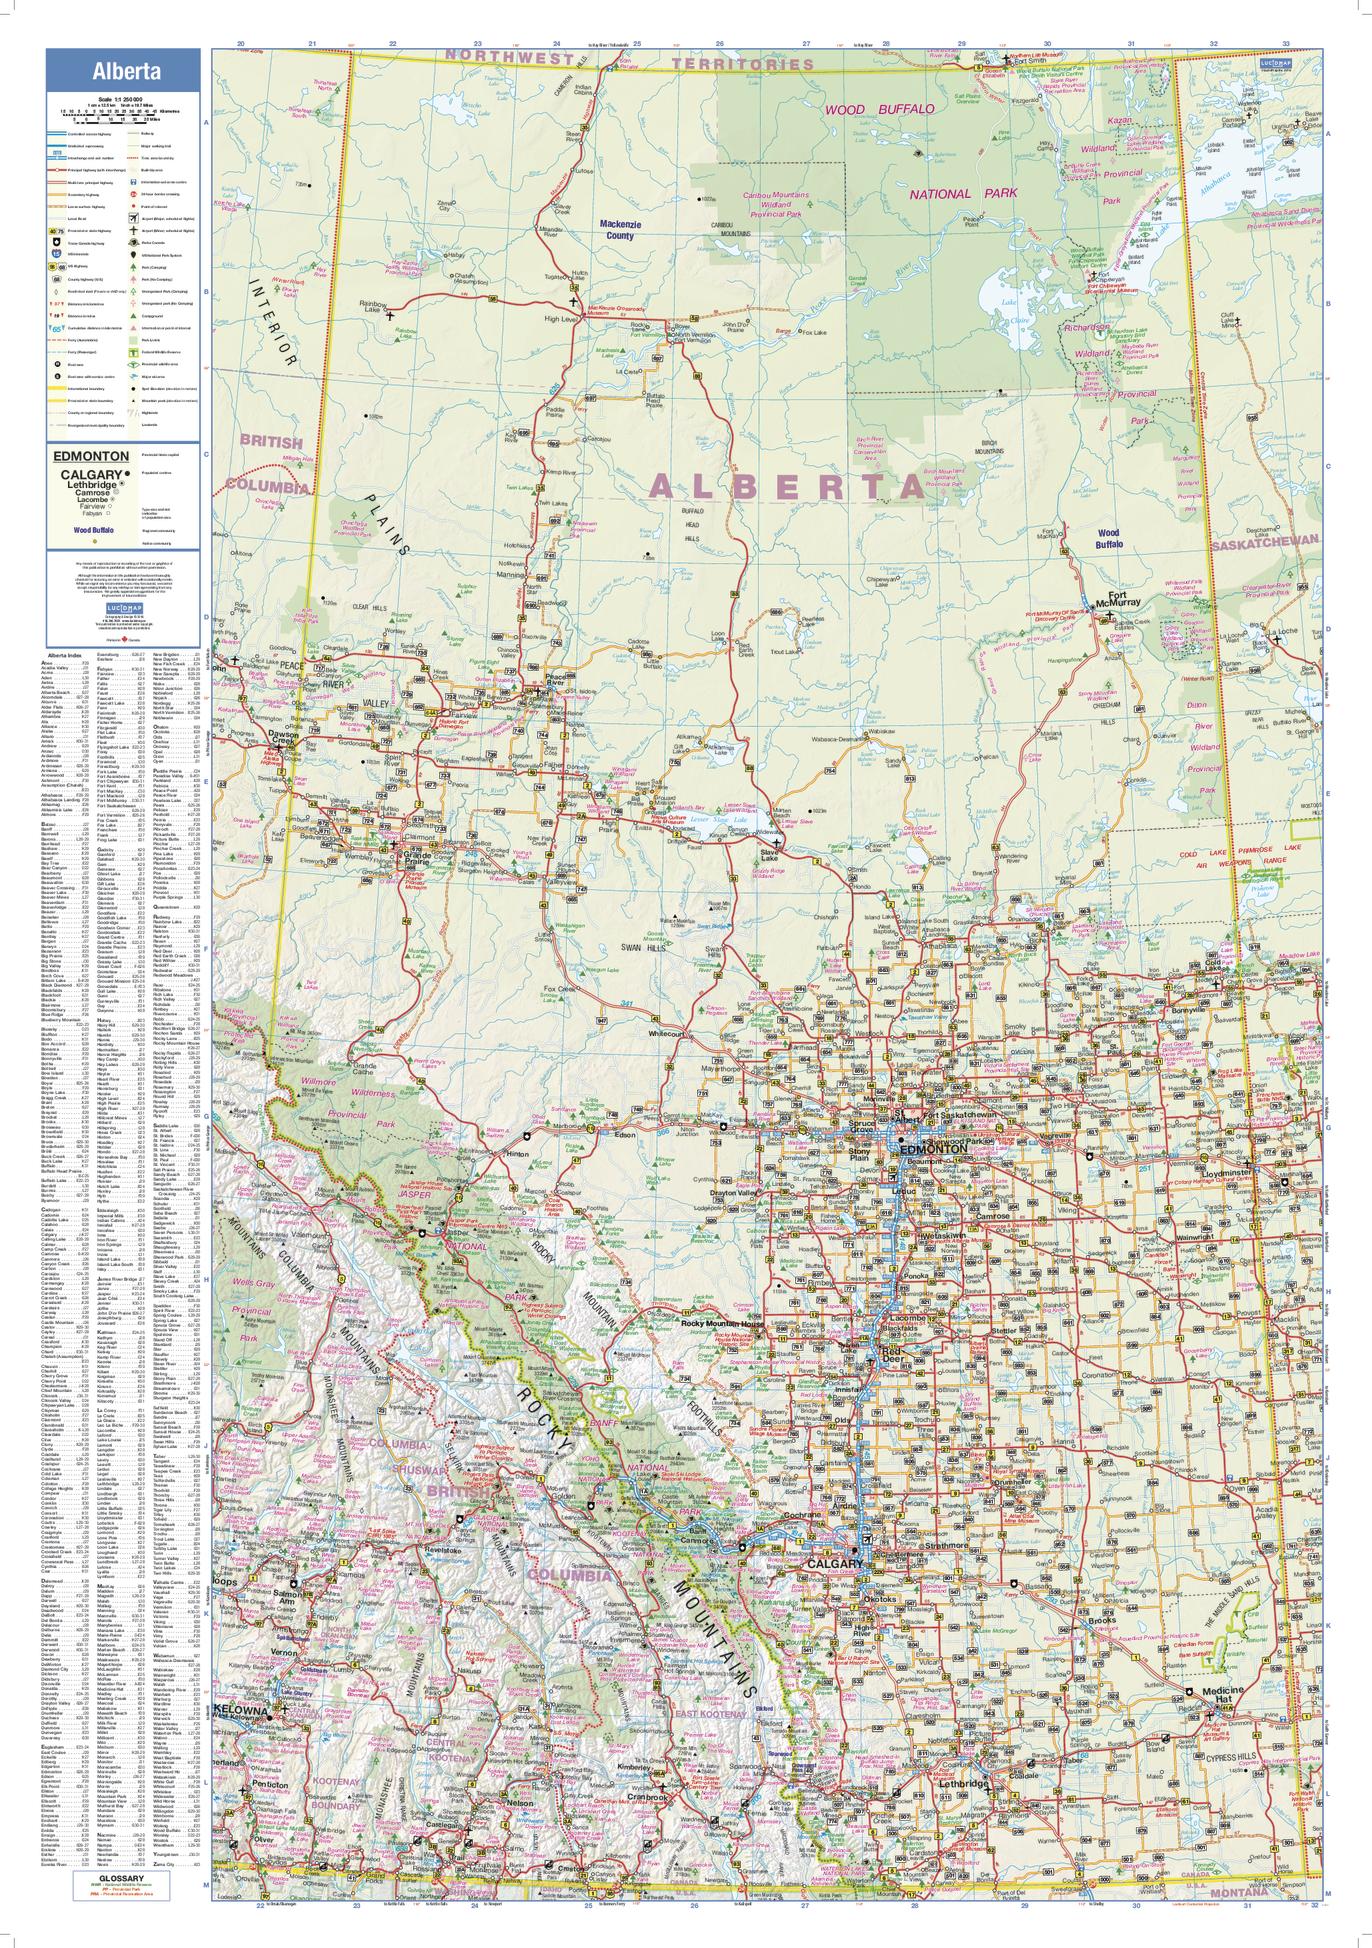 Large Detailed Map Of Alberta With Cities And Towns | My XXX Hot Girl